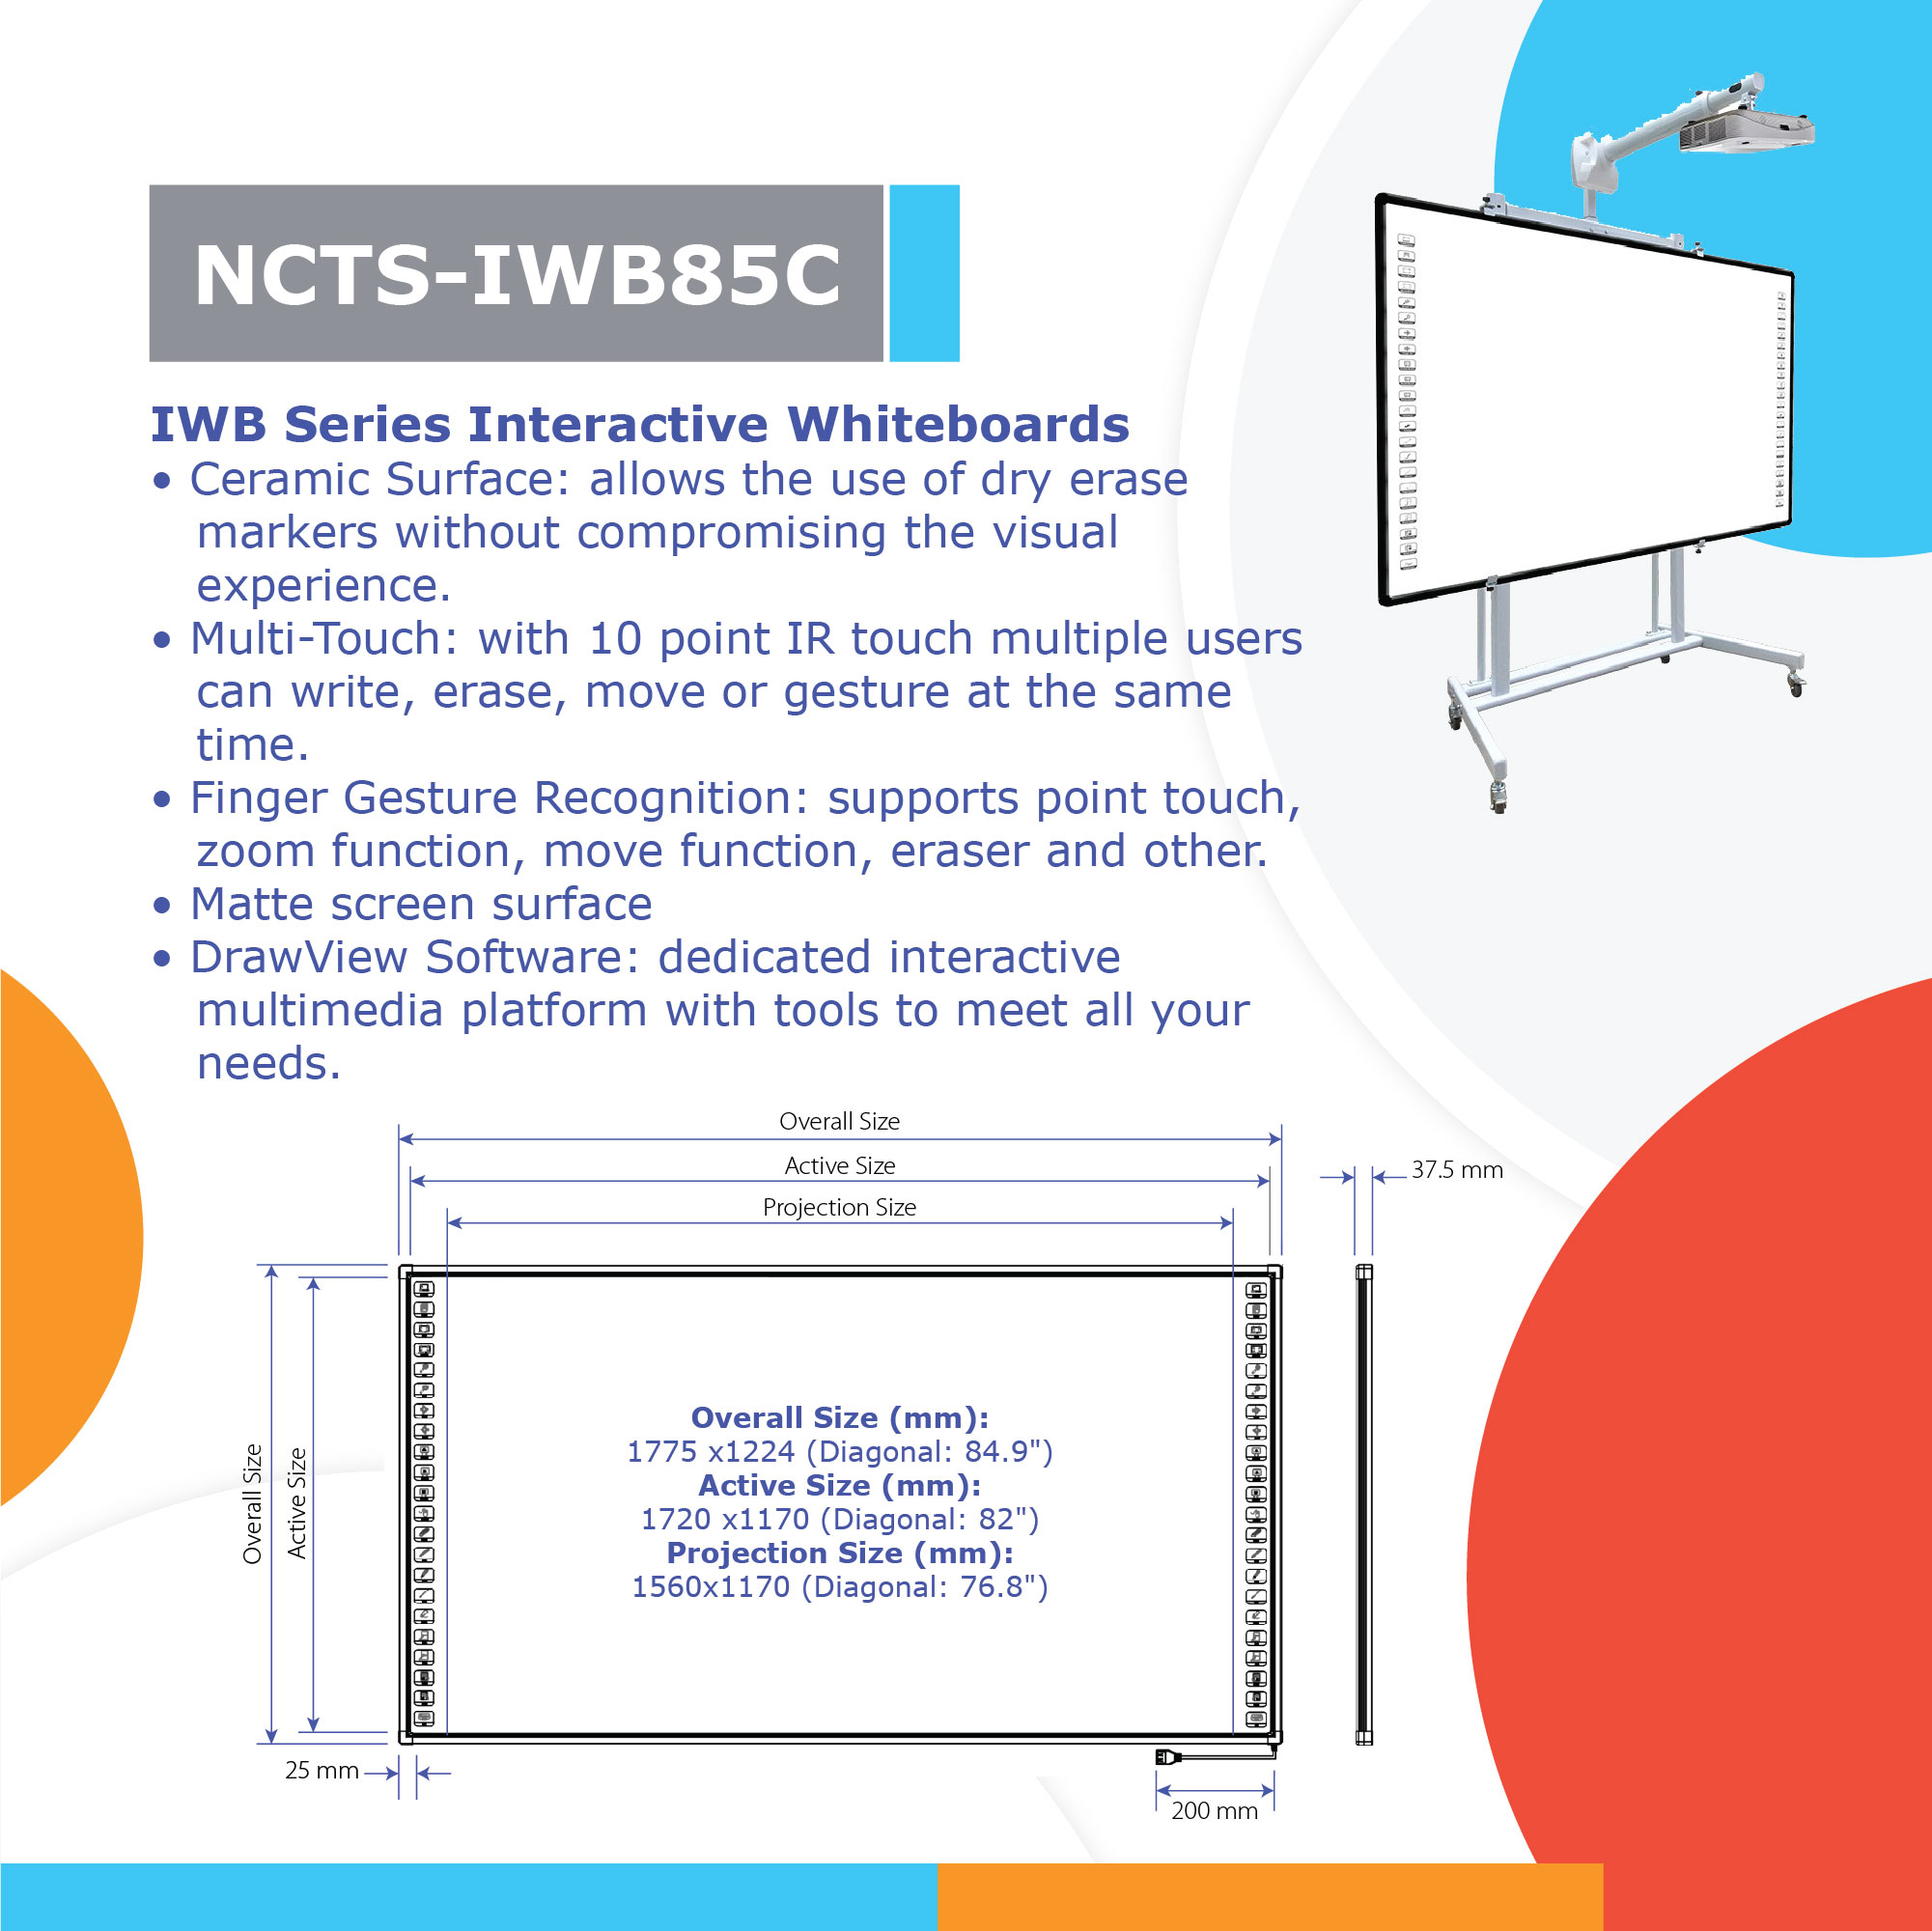 NCTS-IWB85C